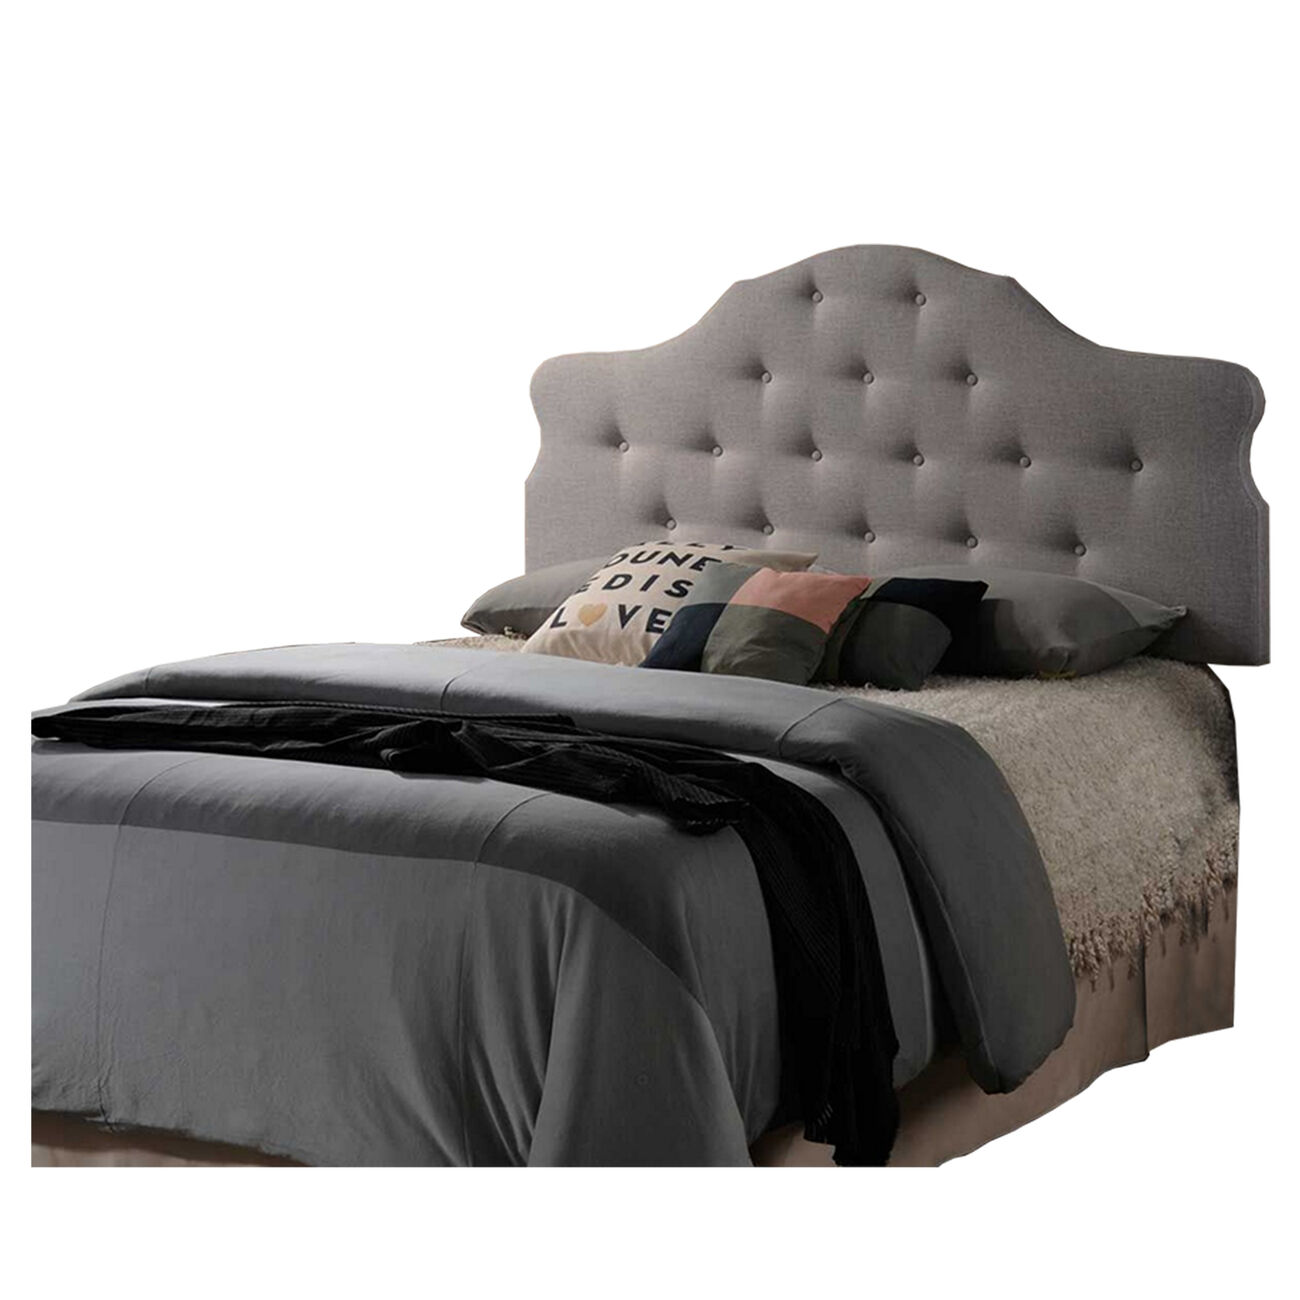 Button Tufted King Headboard with Arched Curved Design, Light Gray - BM229093